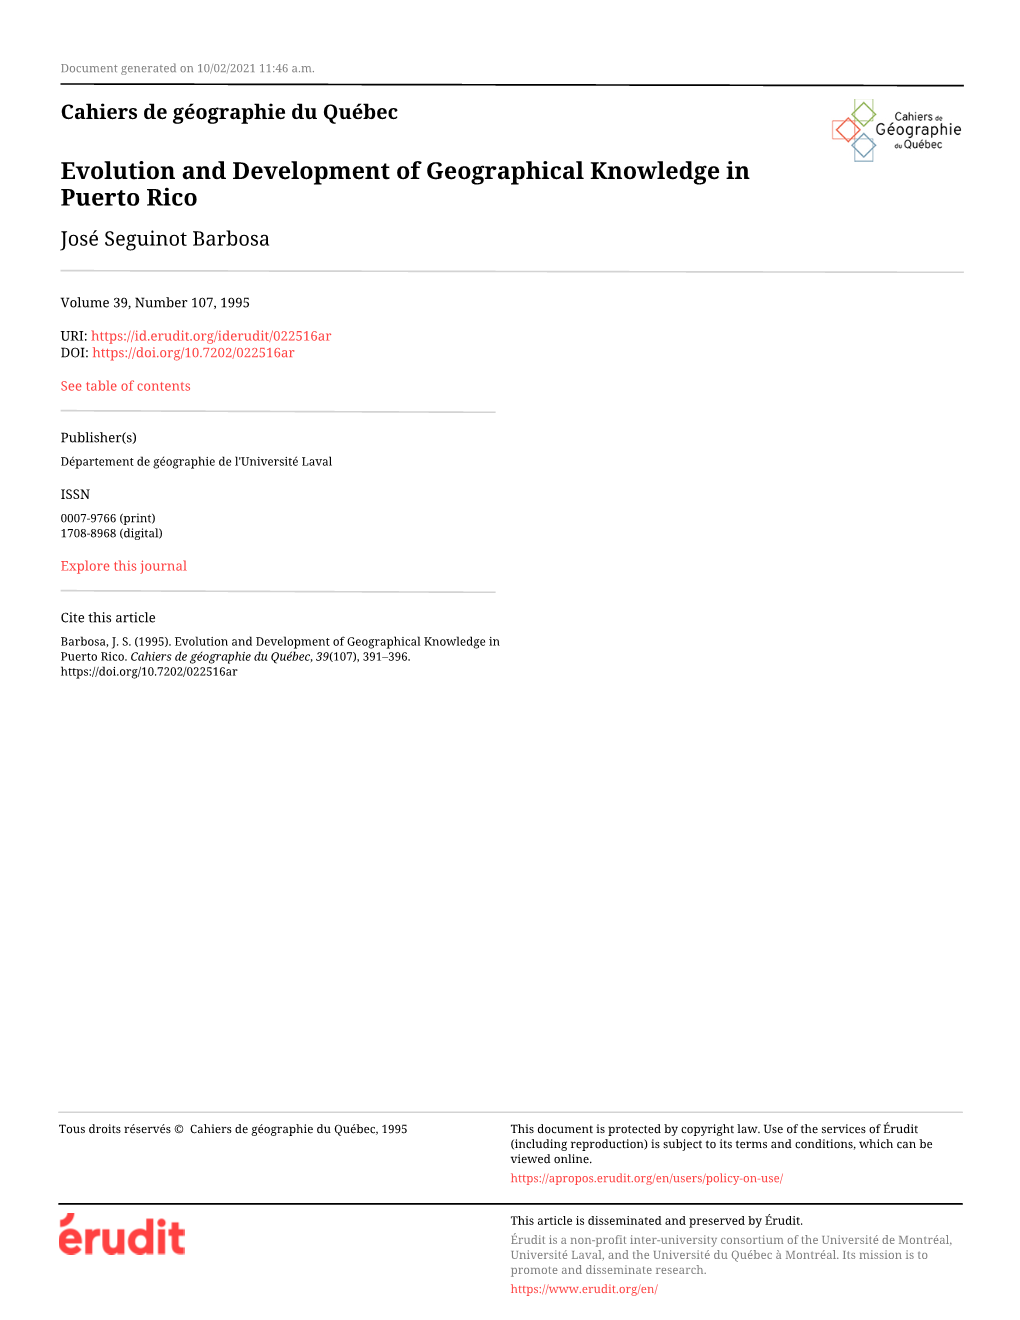 Evolution and Development of Geographical Knowledge in Puerto Rico José Seguinot Barbosa